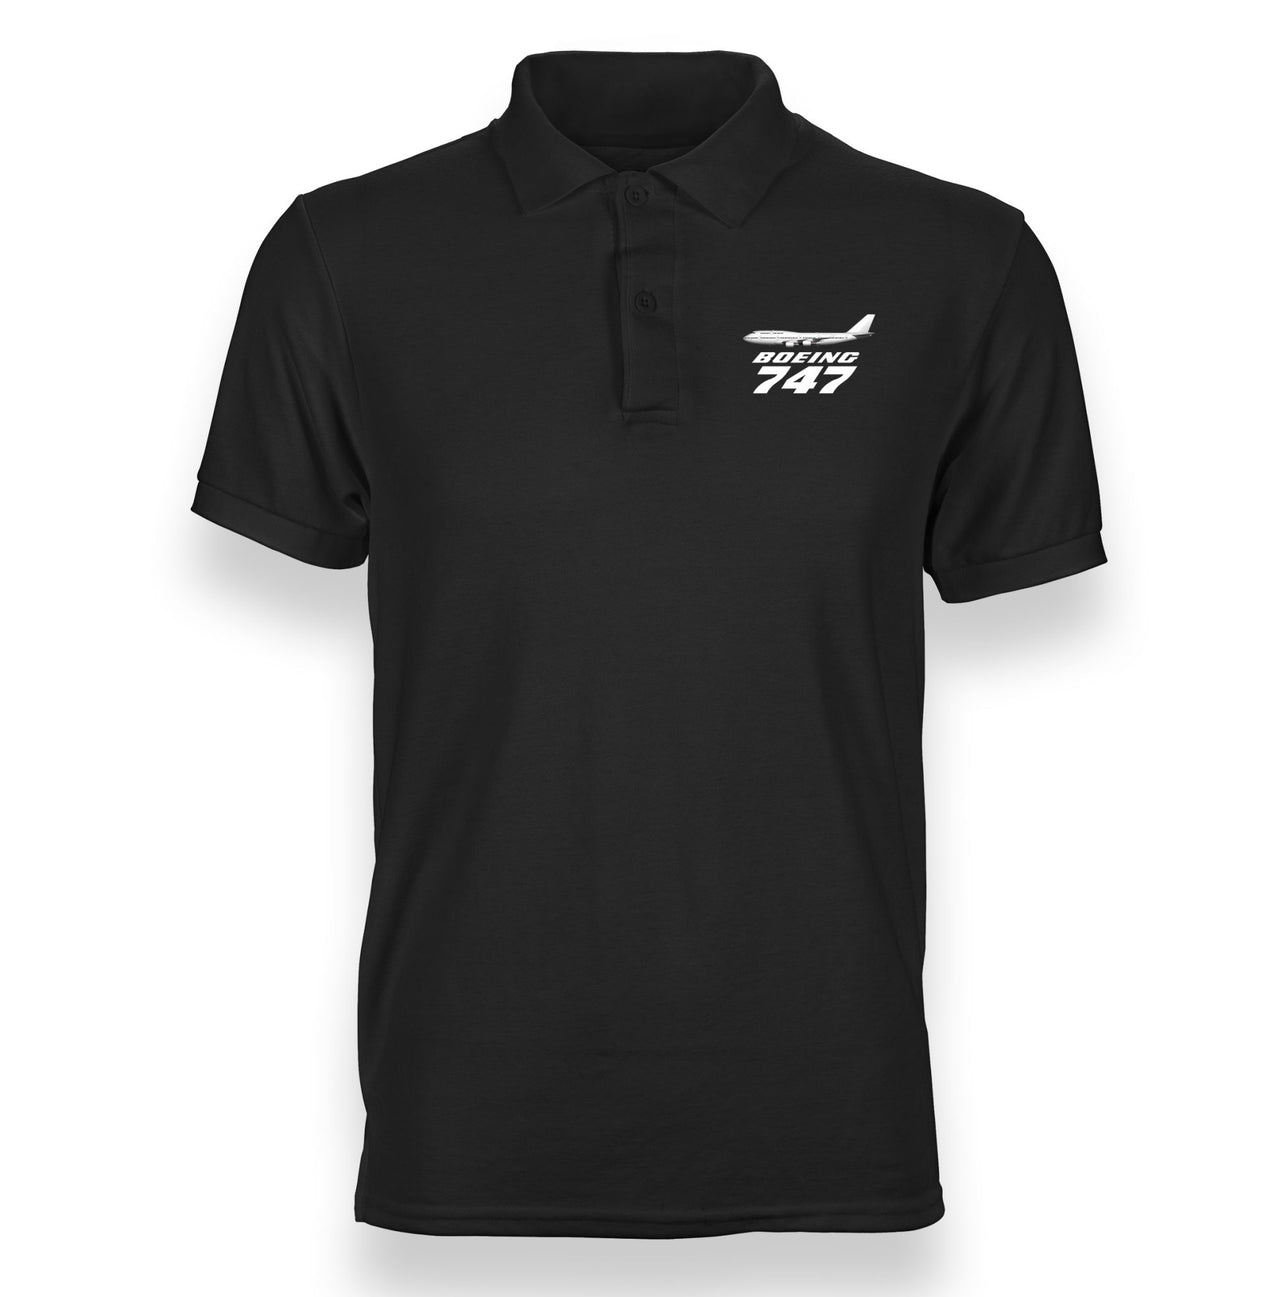 The Boeing 747 Designed "WOMEN" Polo T-Shirts